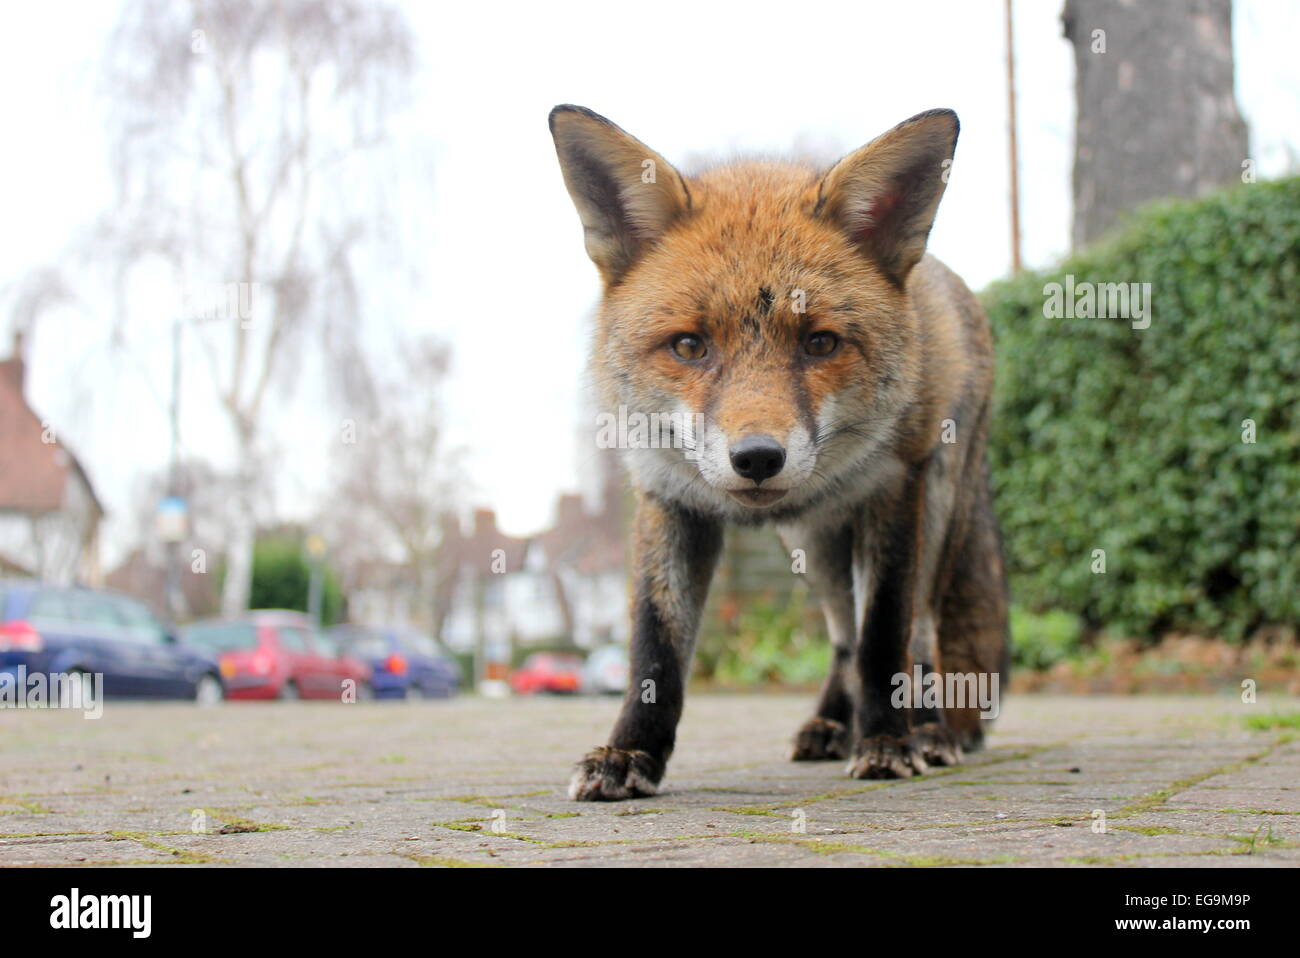 Red Fox, Urbain Londres UK Banque D'Images